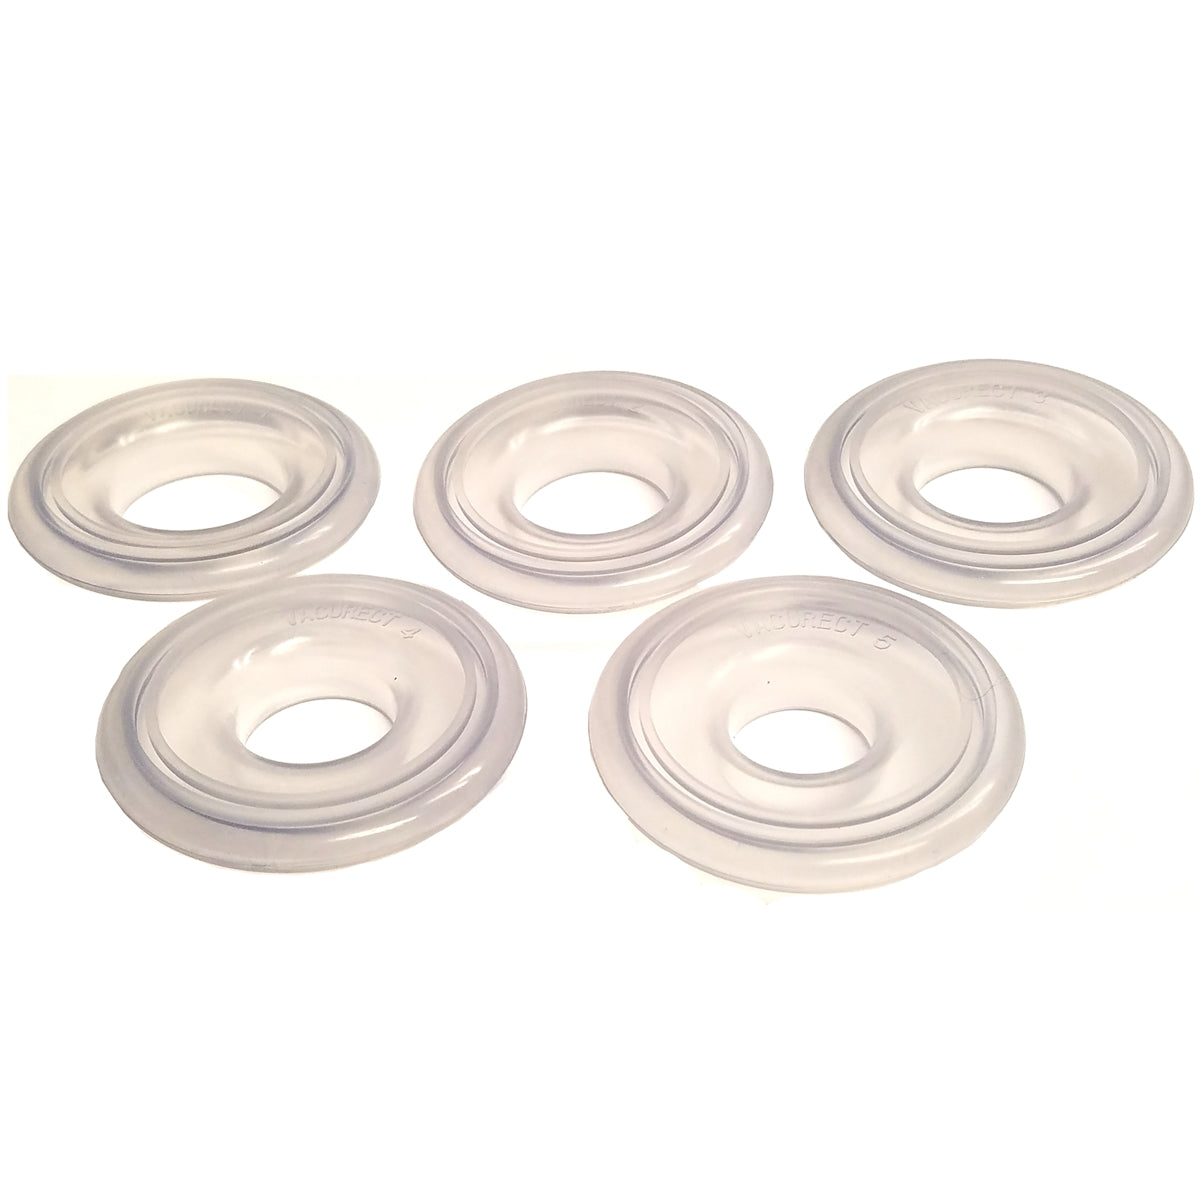 Vacurect Tension Ring Set (5 Rings)